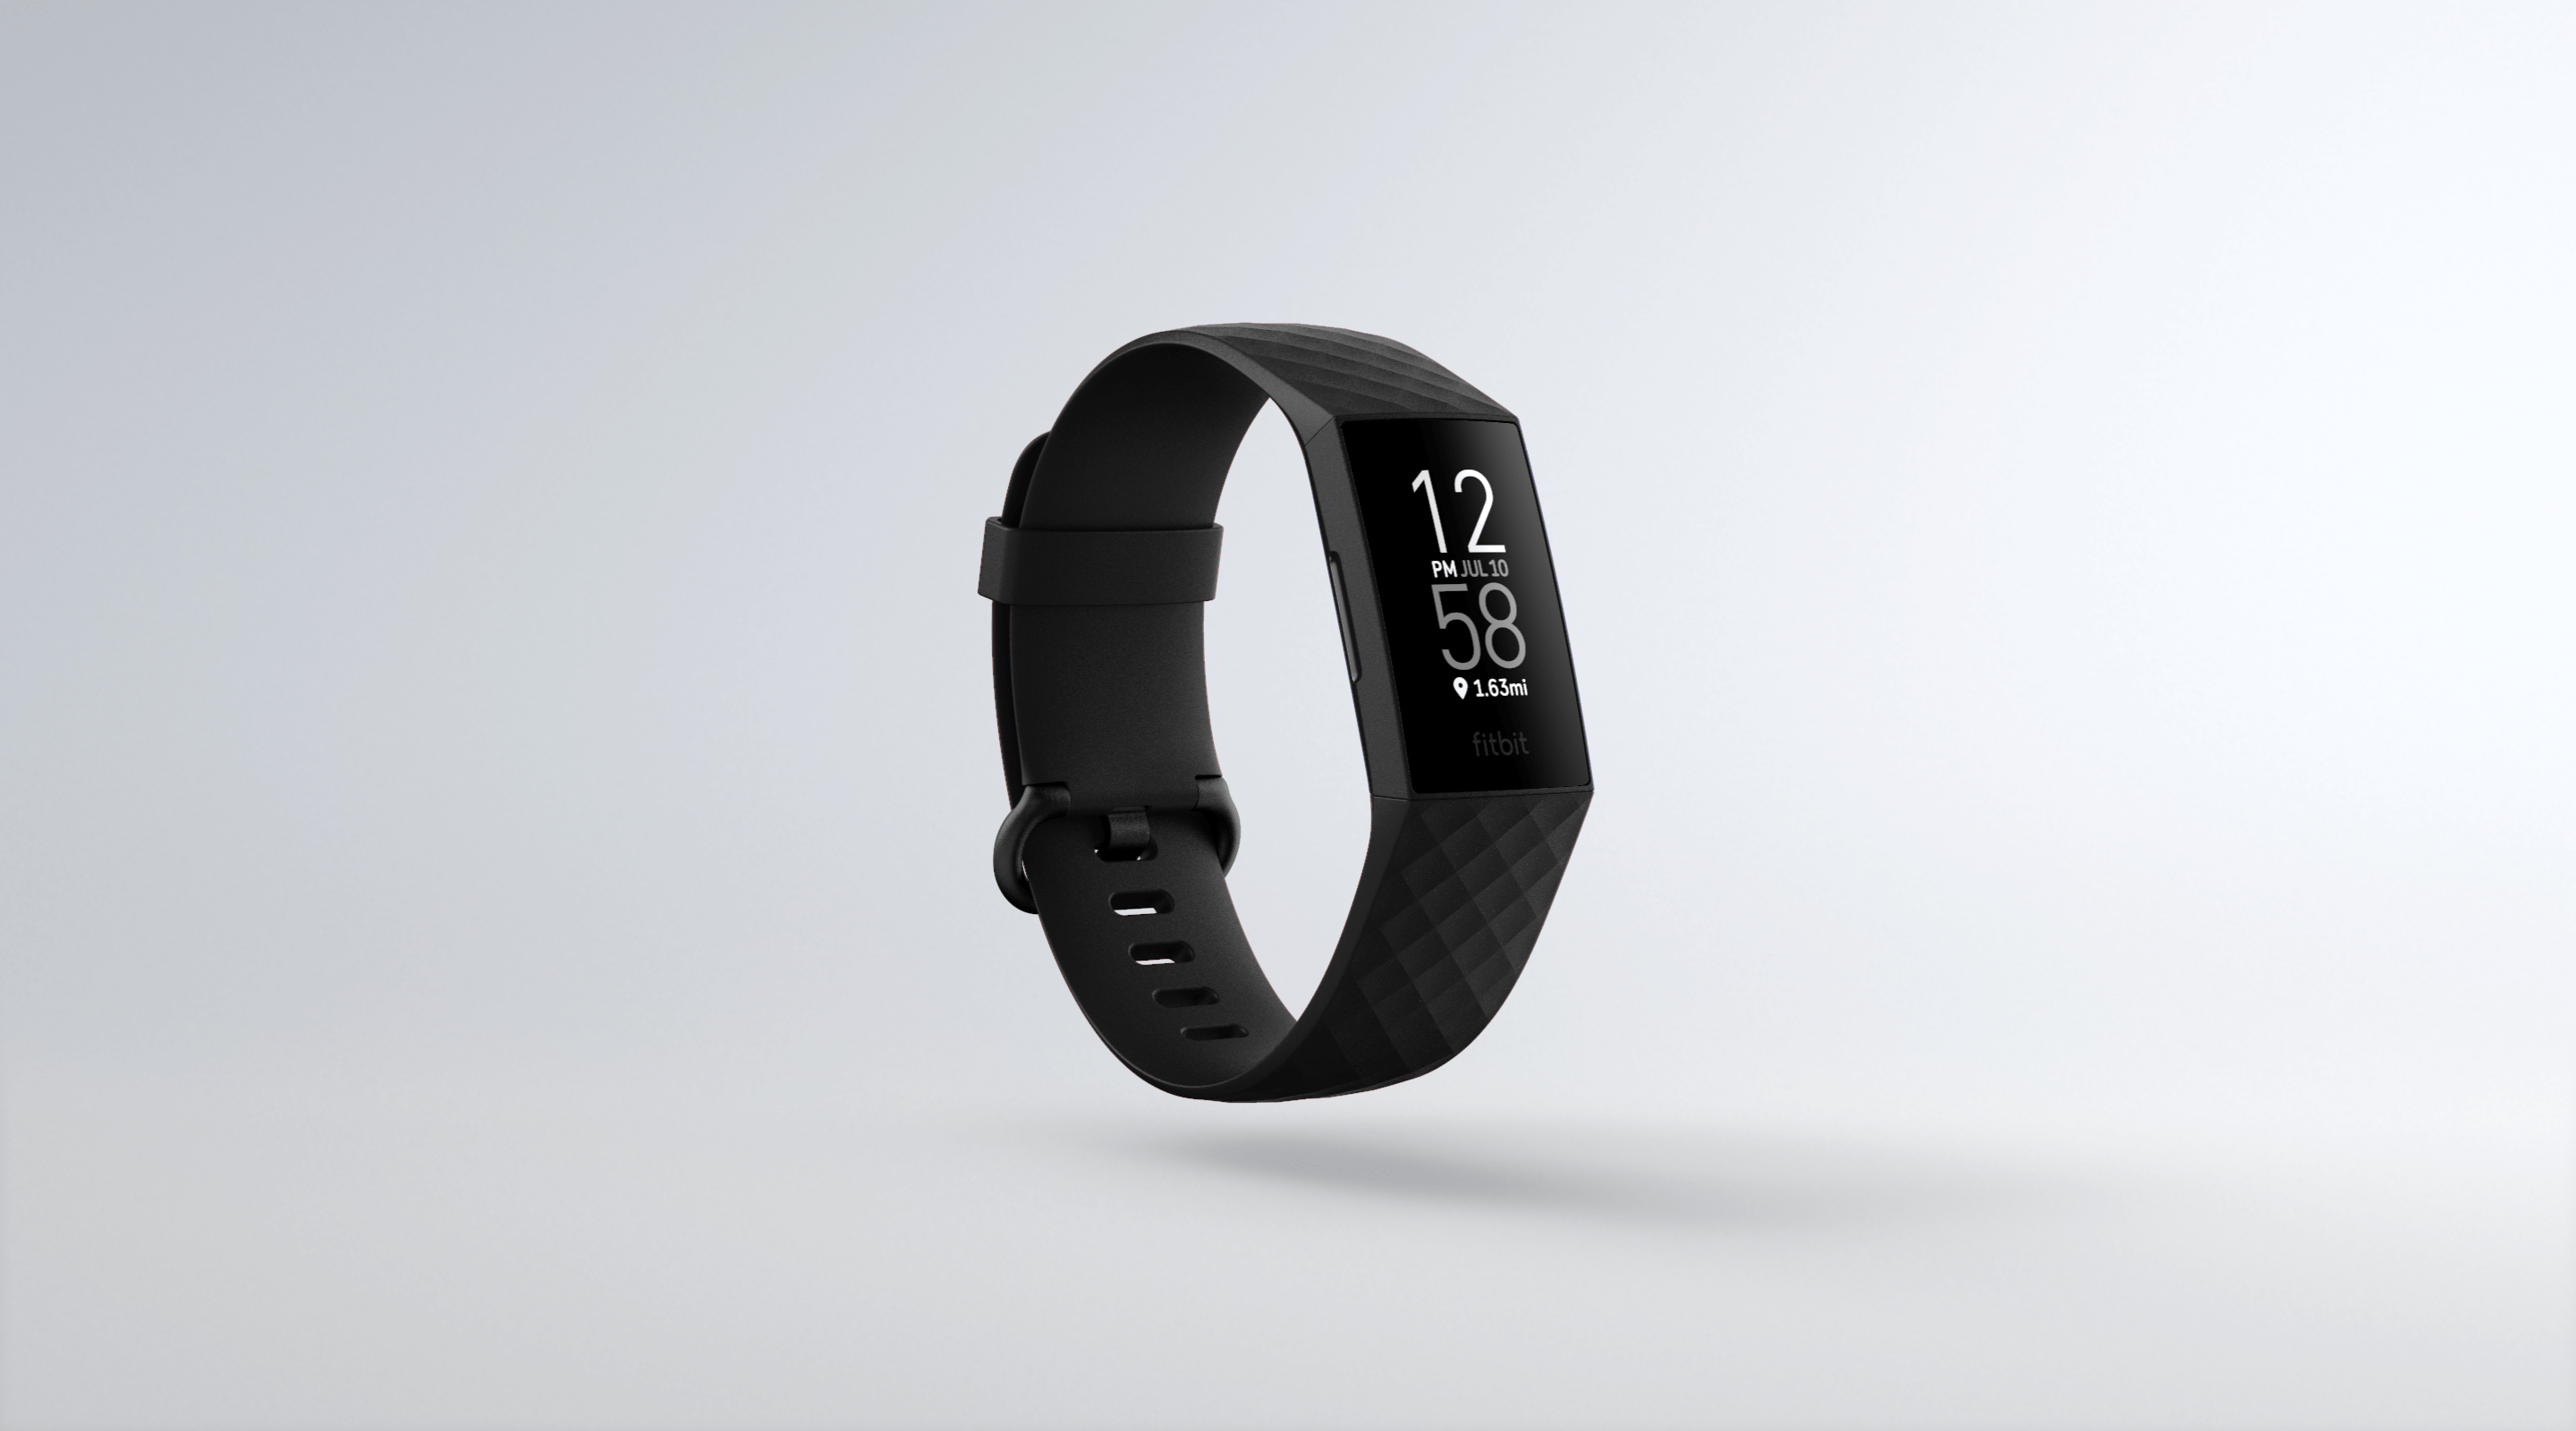 fitbit charge 4 google